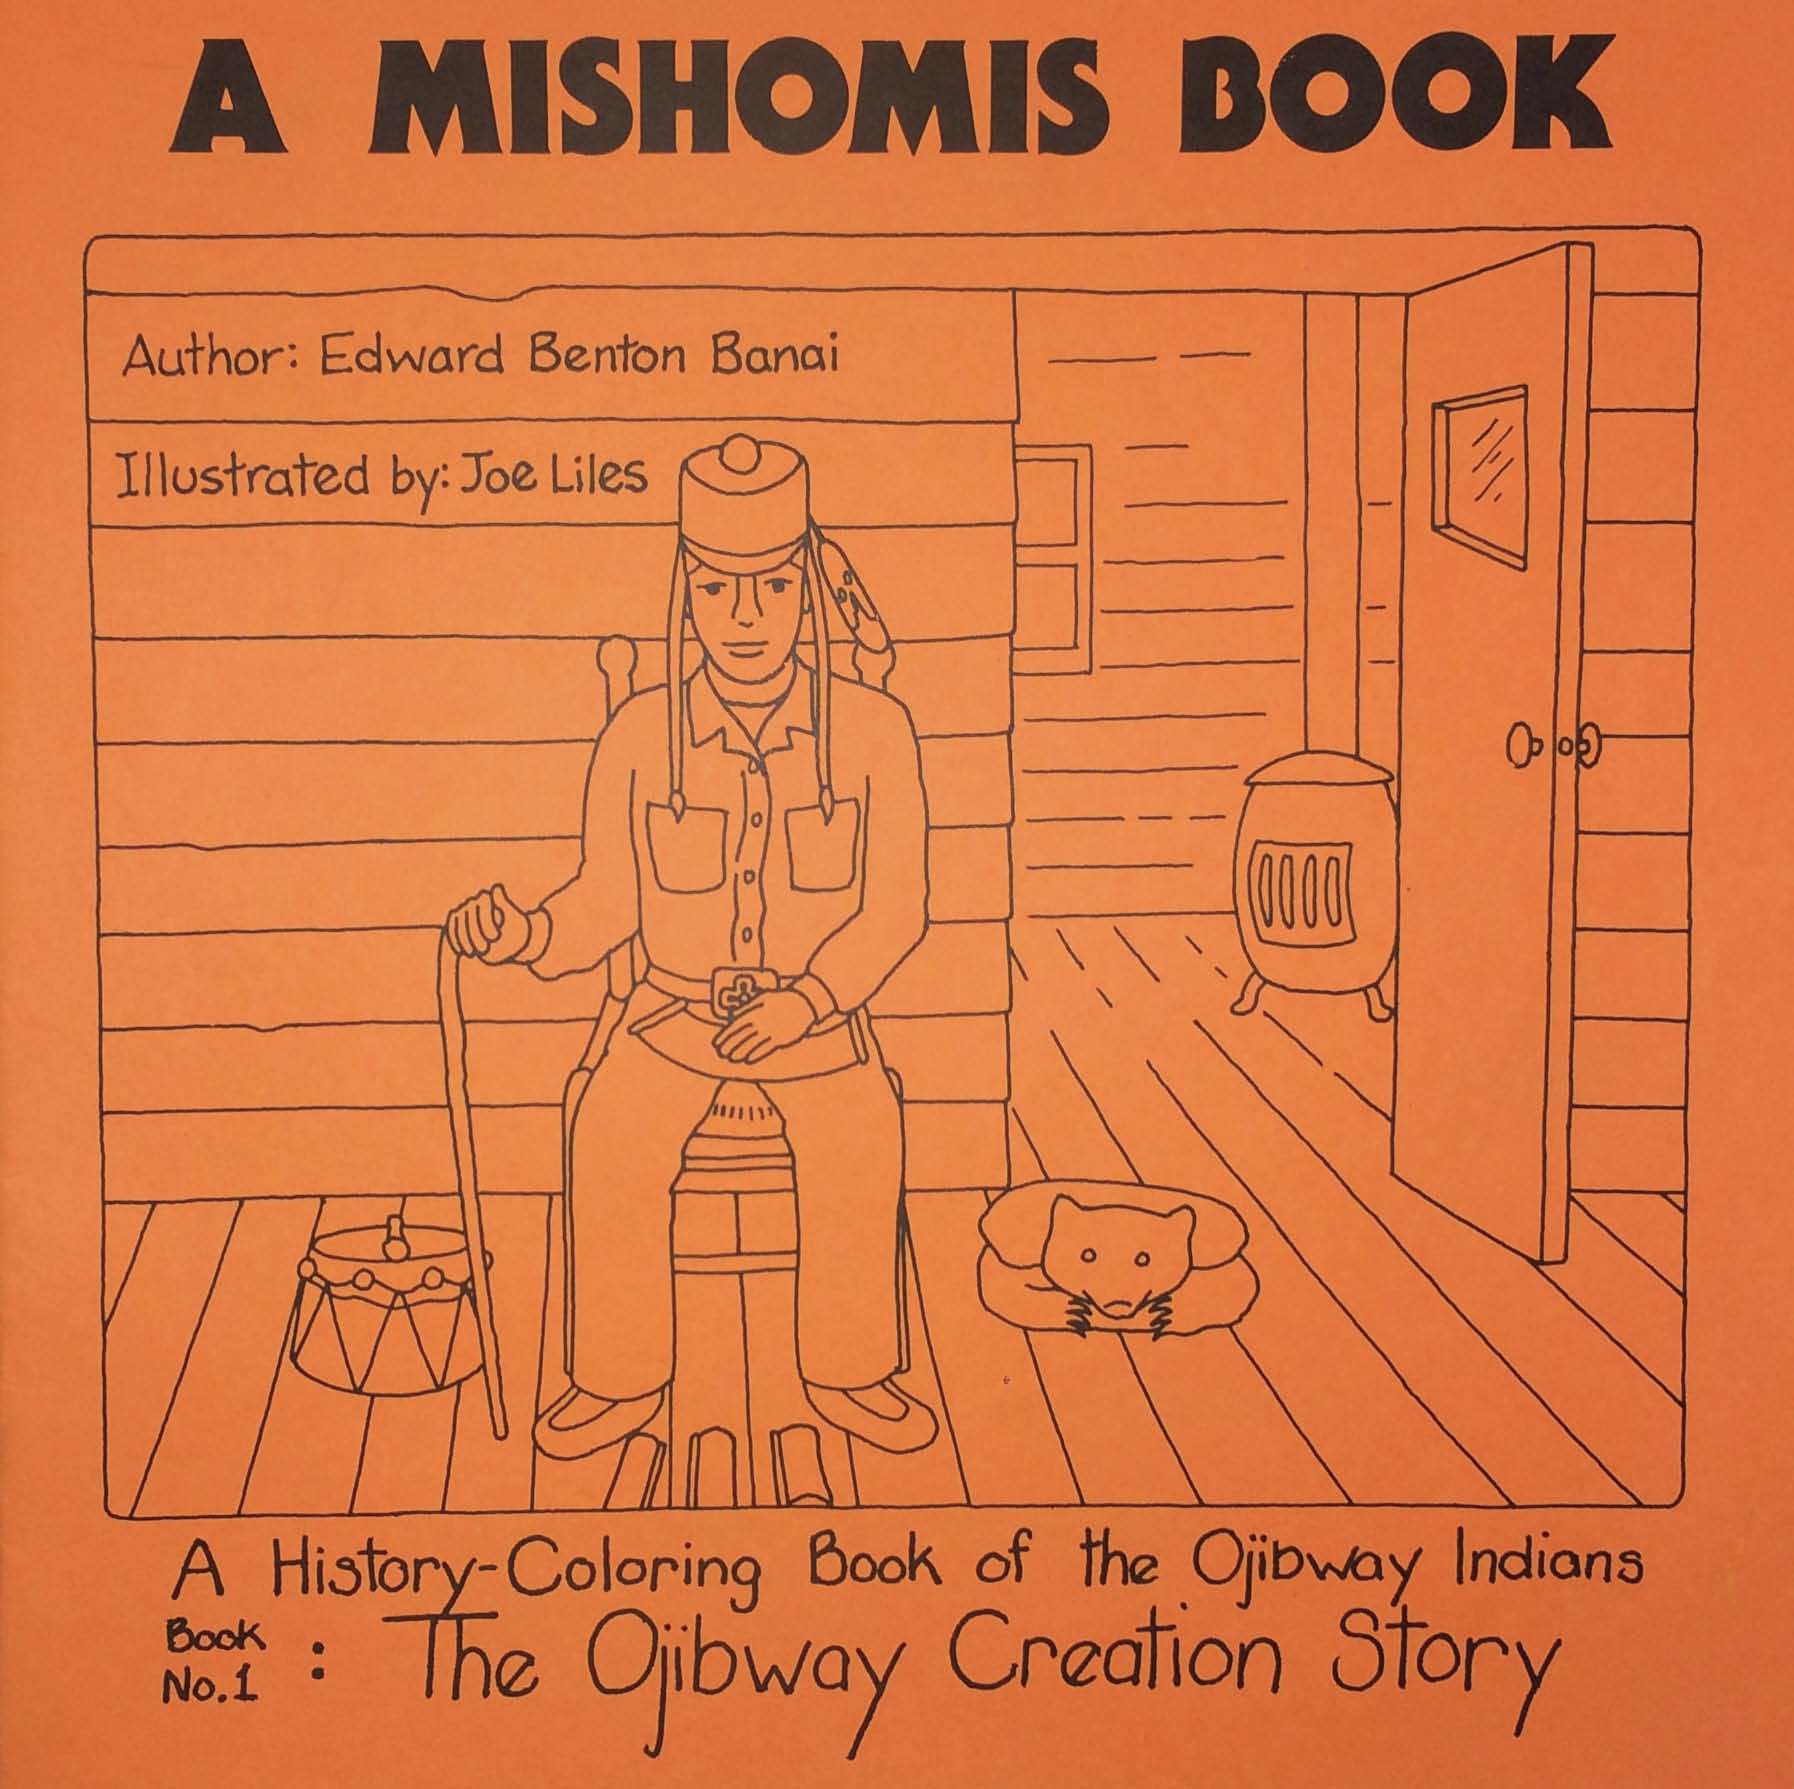 Mishomis Book (set of five coloring books)